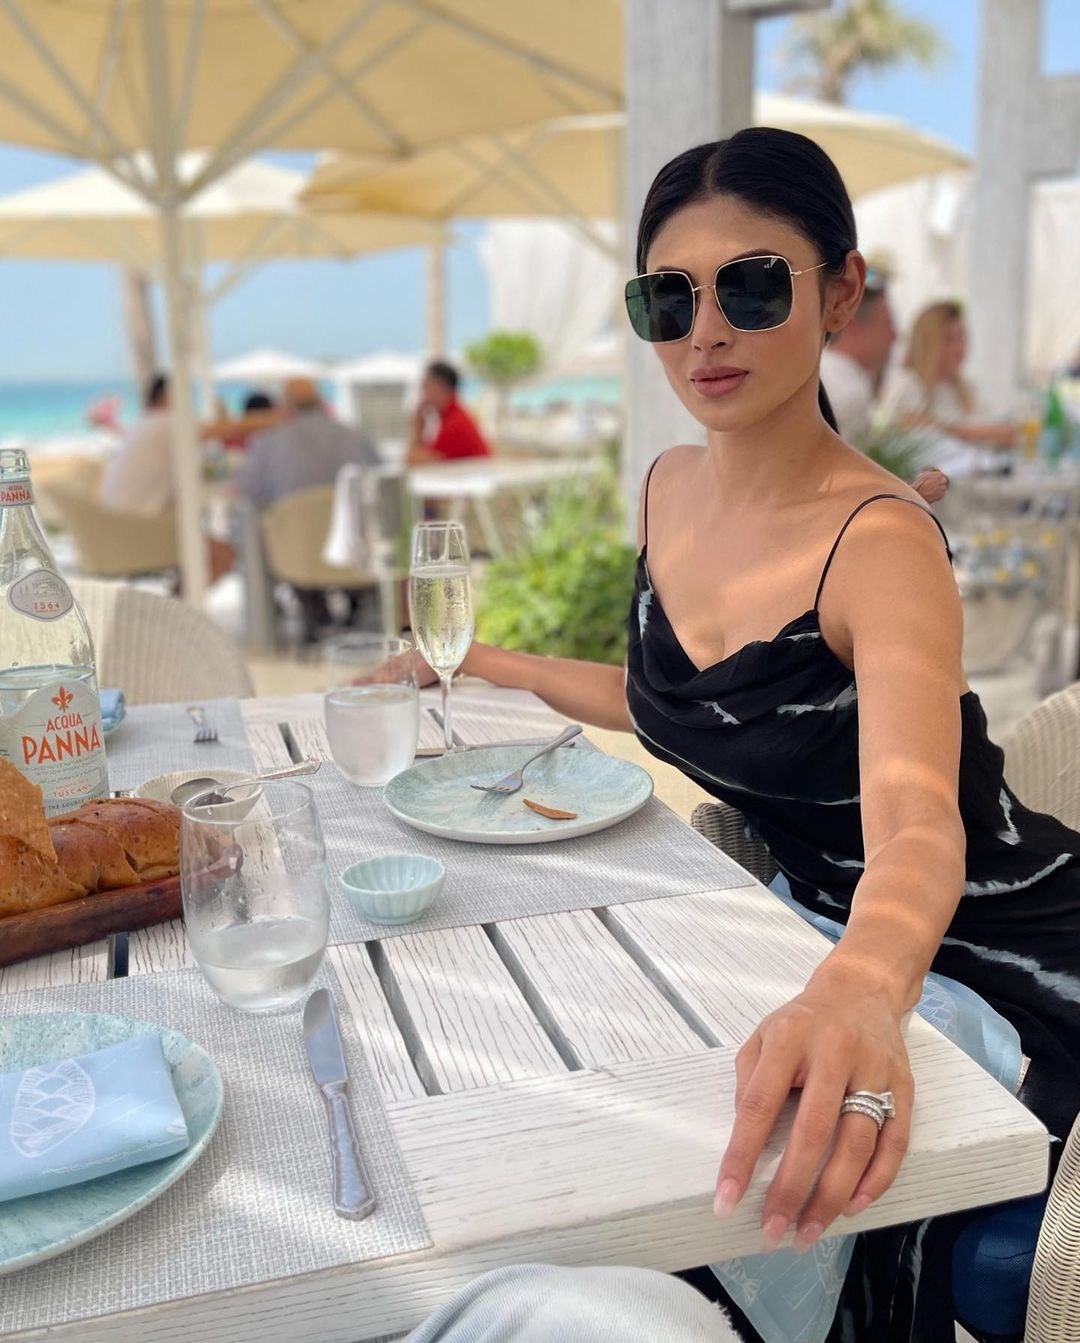 Mouni roy hot low neck fit tight dress photos on her vacation